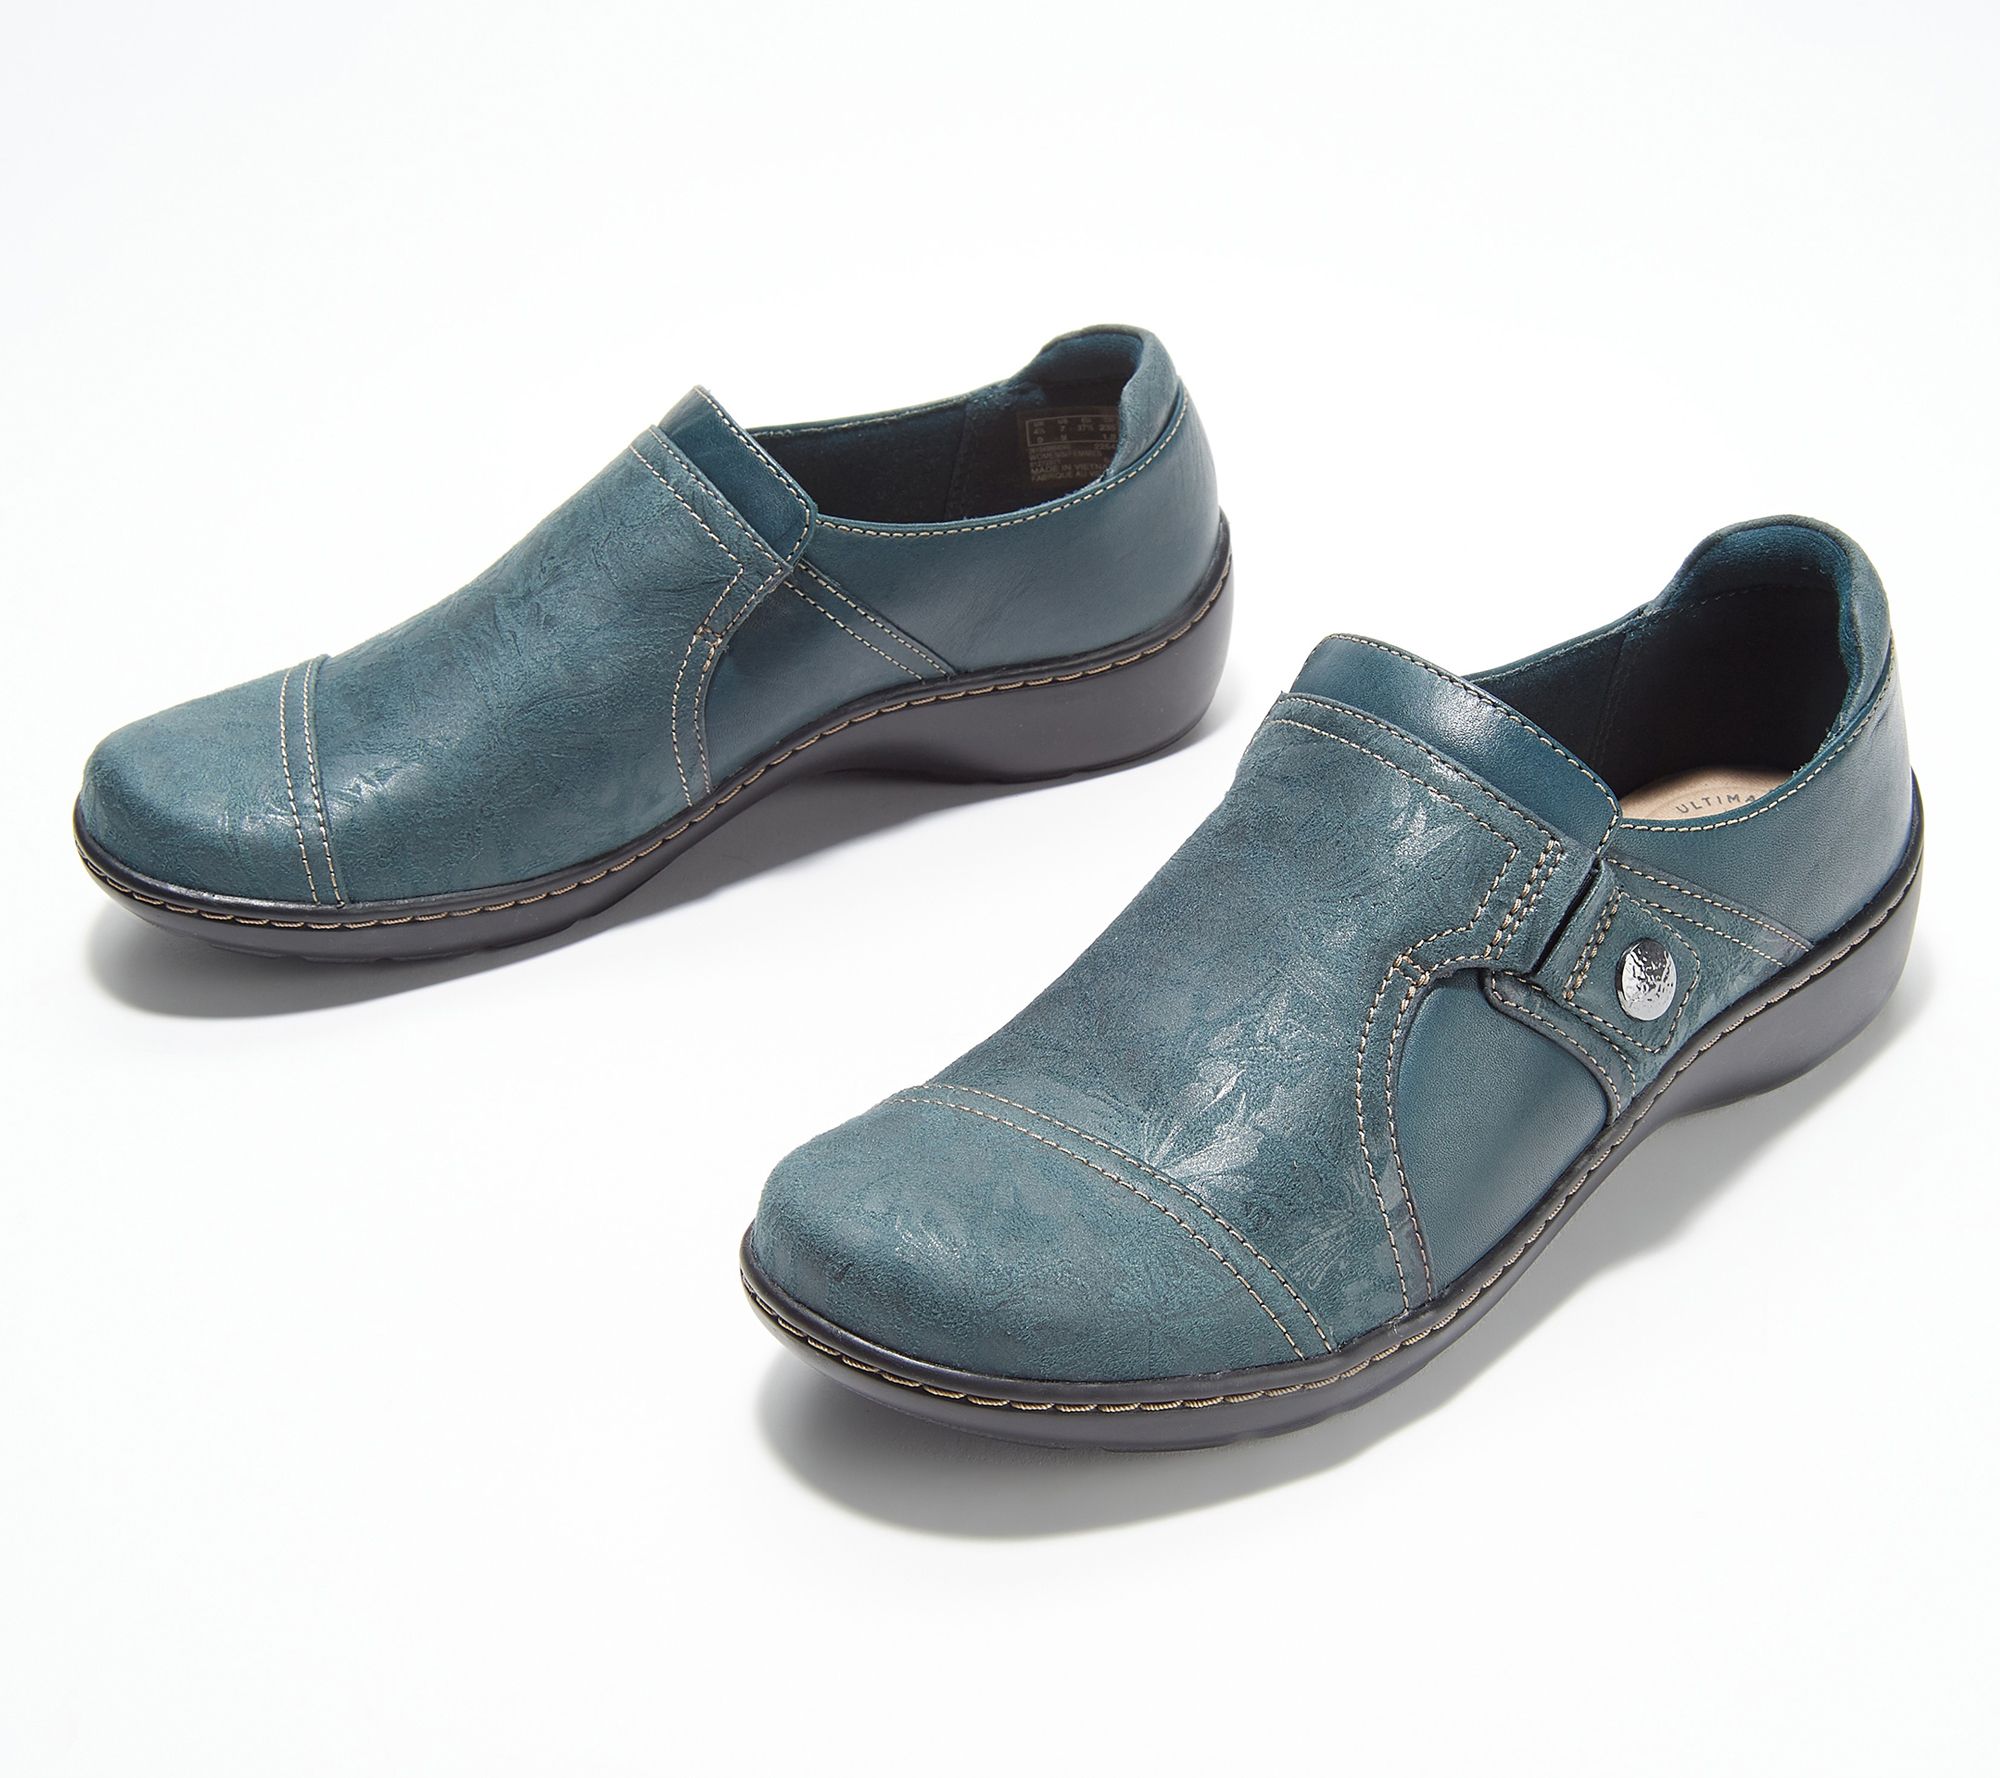 hensynsløs Anden klasse Manhattan As Is" Clarks Collection Leather Slip-On Shoes - Cora Poppy - QVC.com